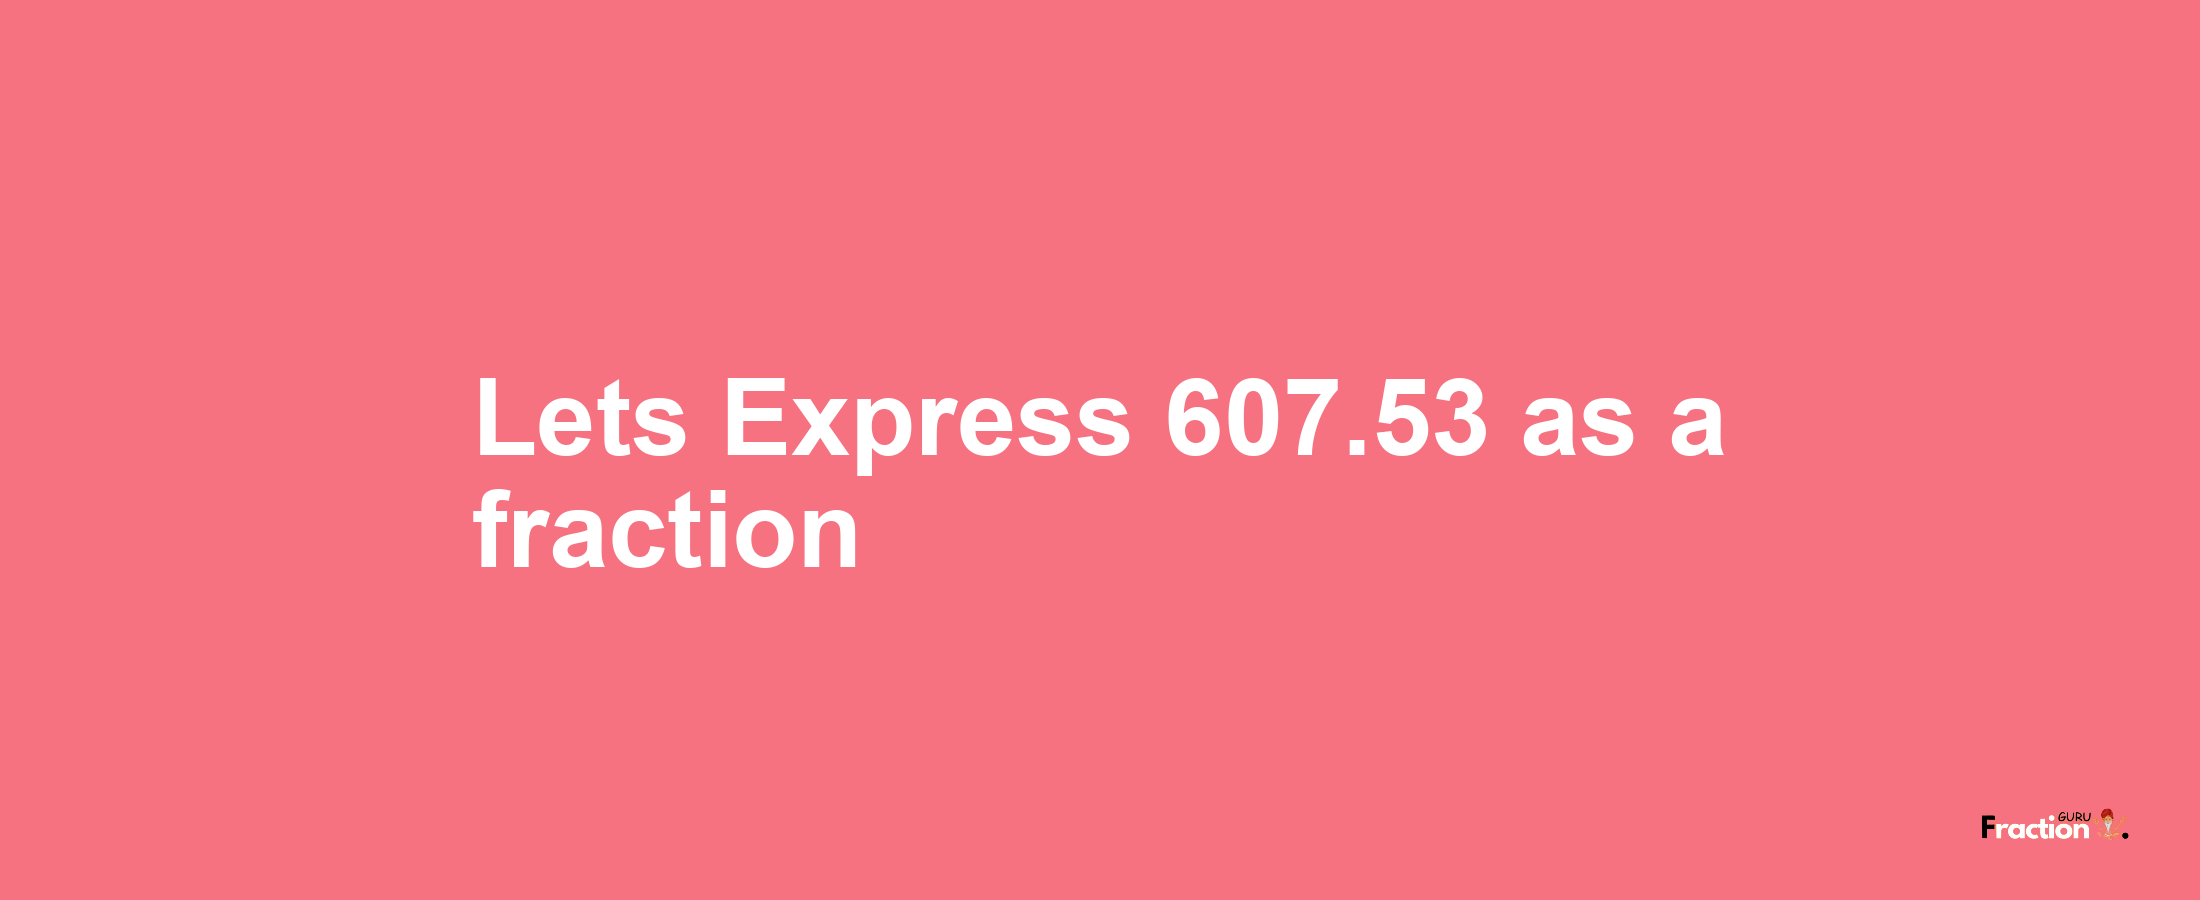 Lets Express 607.53 as afraction